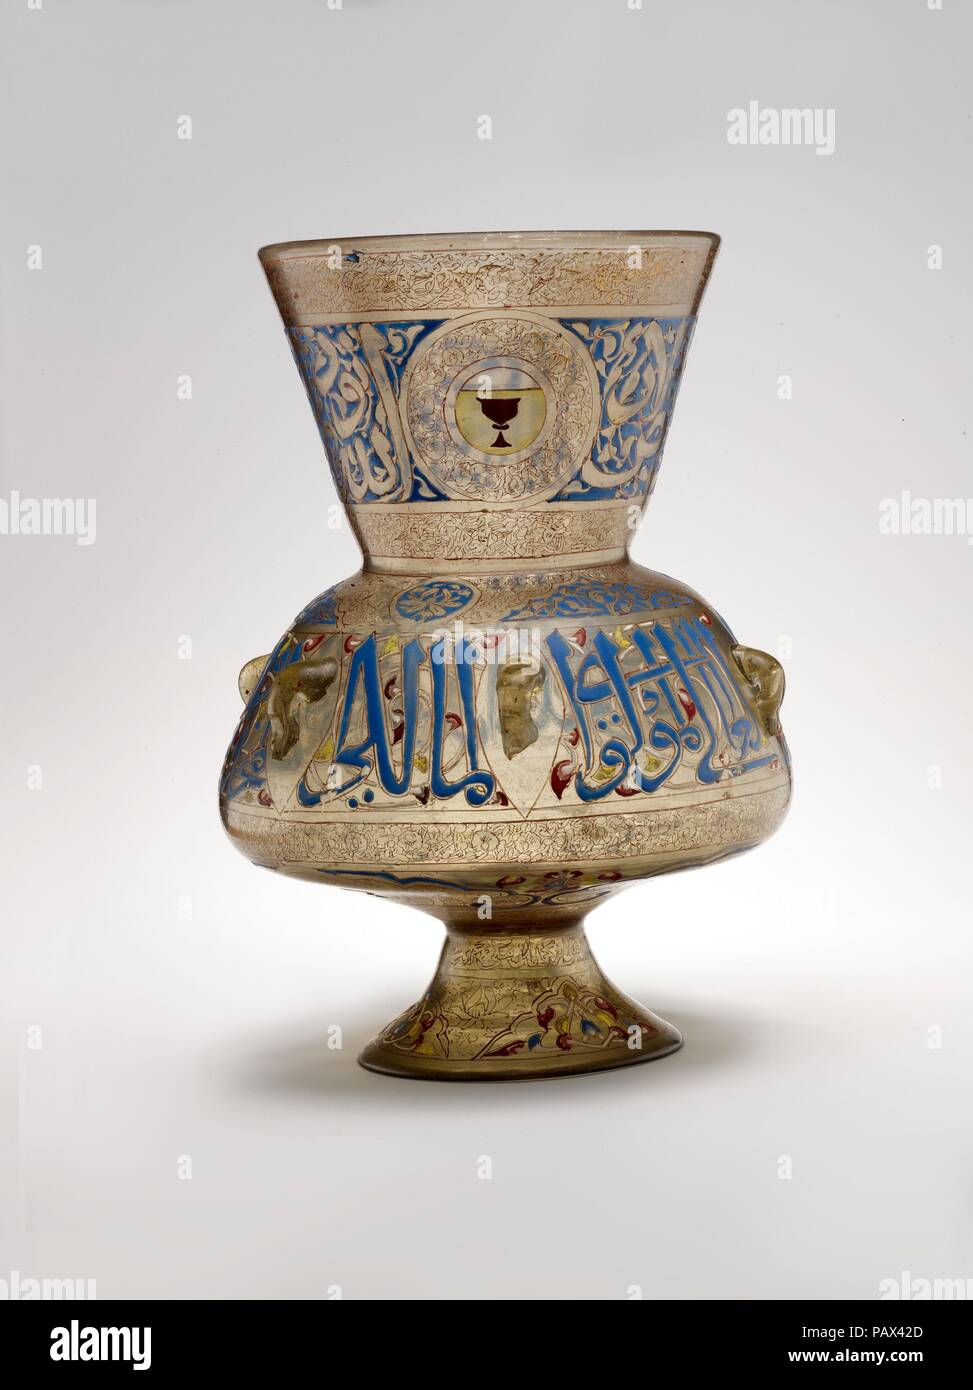 Mosque Lamp of Amir Qawsun. Dimensions: H. 14 1/8 in. (35.9 cm)  Max. diam. 10 1/16 in. (25.6 cm)  Diam. with handles 10 5/16 in. (26.2 cm). Maker: 'Ali ibn Muhammad al-Barmaki ?. Date: ca. 1329-35.  Large glass lamps of this type were commissioned by sultans and members of their court for mosques, <i>madrasa</i>s (Qur'anic schools), tombs, hospices, and other public buildings in fourteenth-century Mamluk Cairo. This example bears the name of its patron, Qawsun (d. 1342), amir of the Sultan al-Nasir Muhammad ibn Qalaun (r. 1293-1341 with brief interruptions), and was probably intended for one  Stock Photo